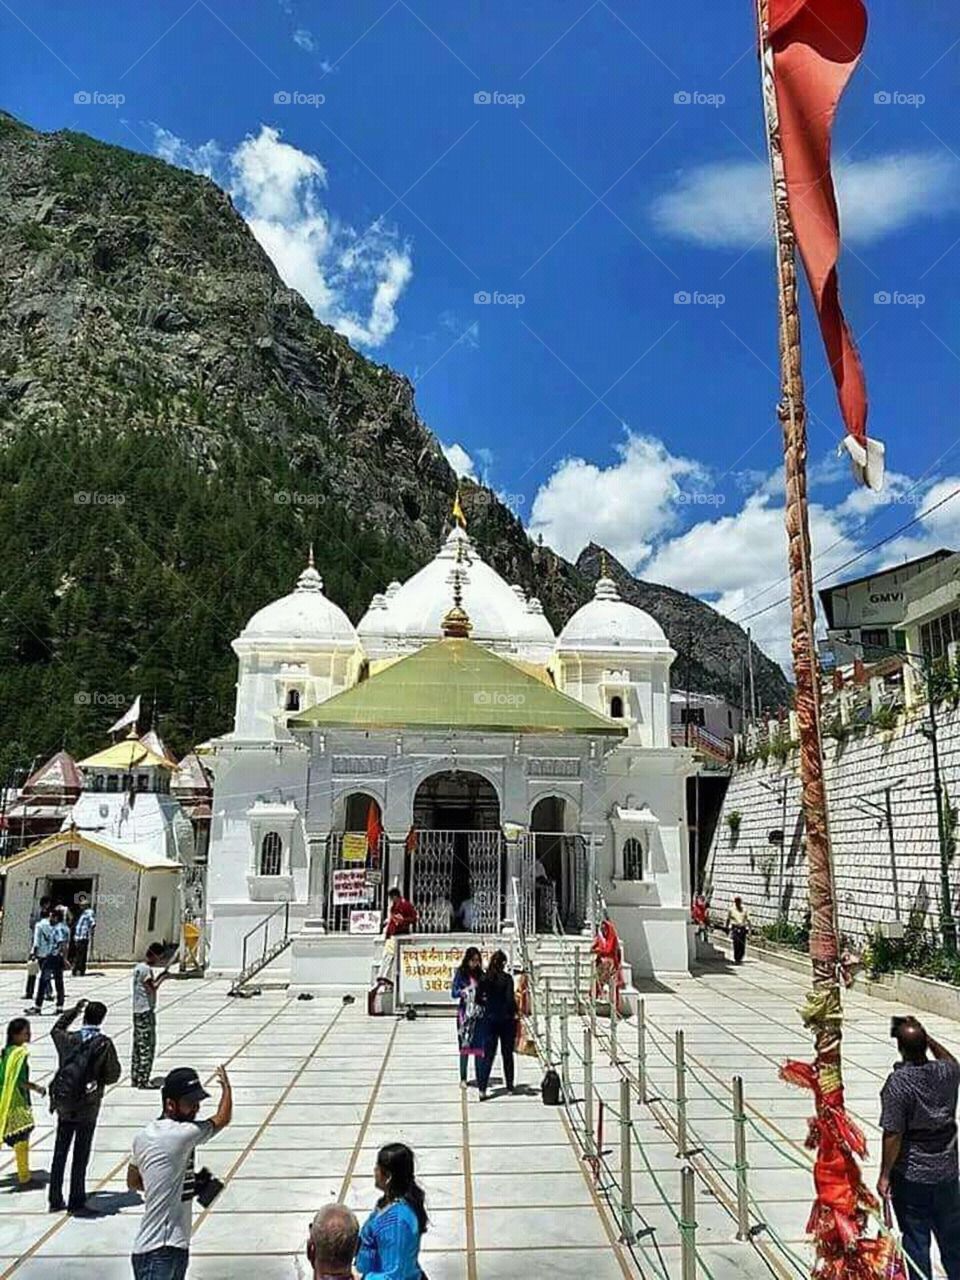 Gangotri is a town in Uttarkashi district in the state of Uttarakhand, India. It is a Hindu pilgrim town on the banks of the river Bhagirathi and origin of River Ganges. It is on the Greater Himalayan Range, at a height of 3,100 metres.